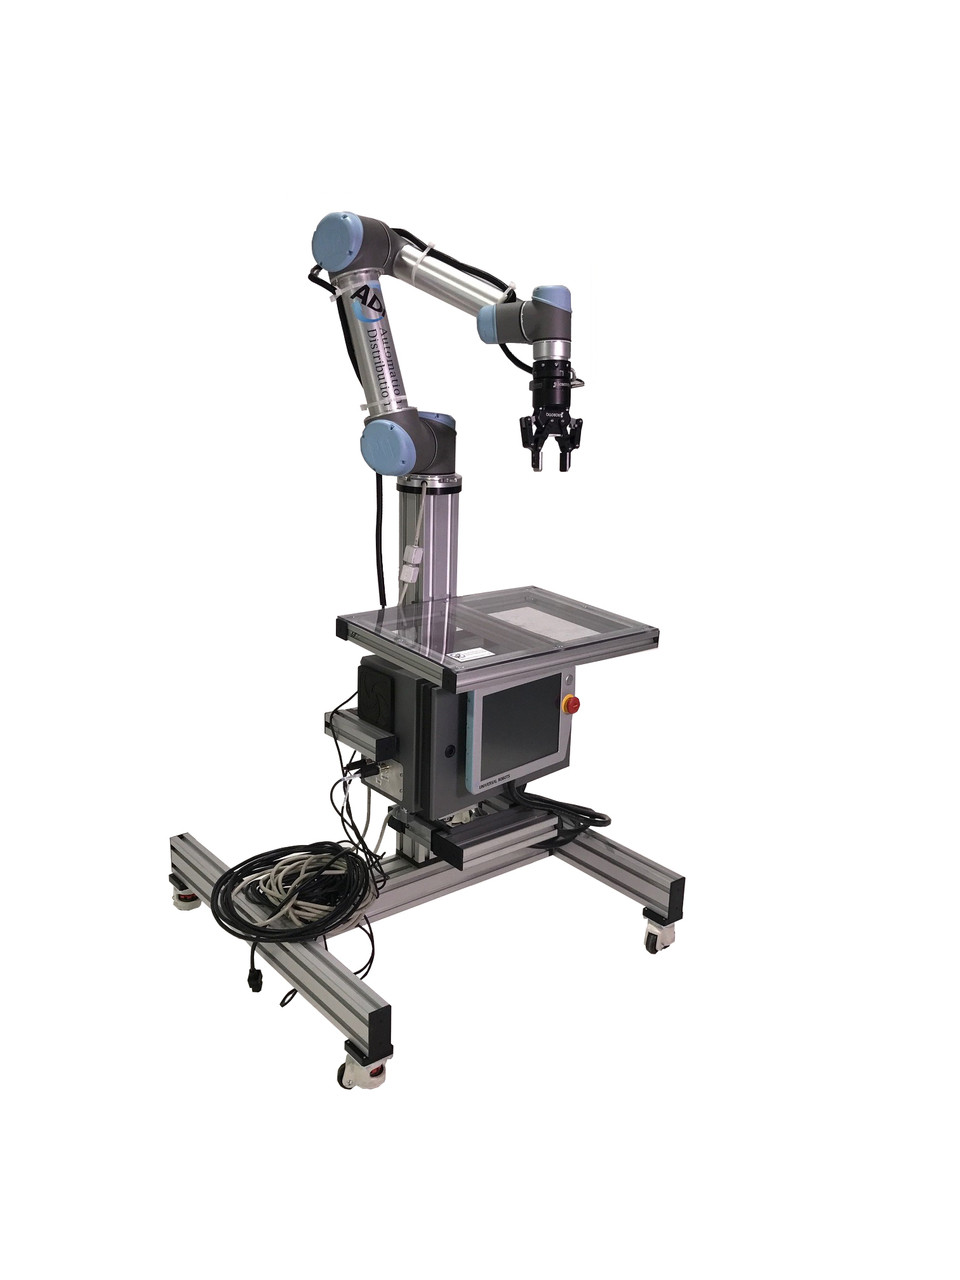 Universal UR5 Robot Arm with Mobile Stand, 2-Finger Gripper, Force Torque